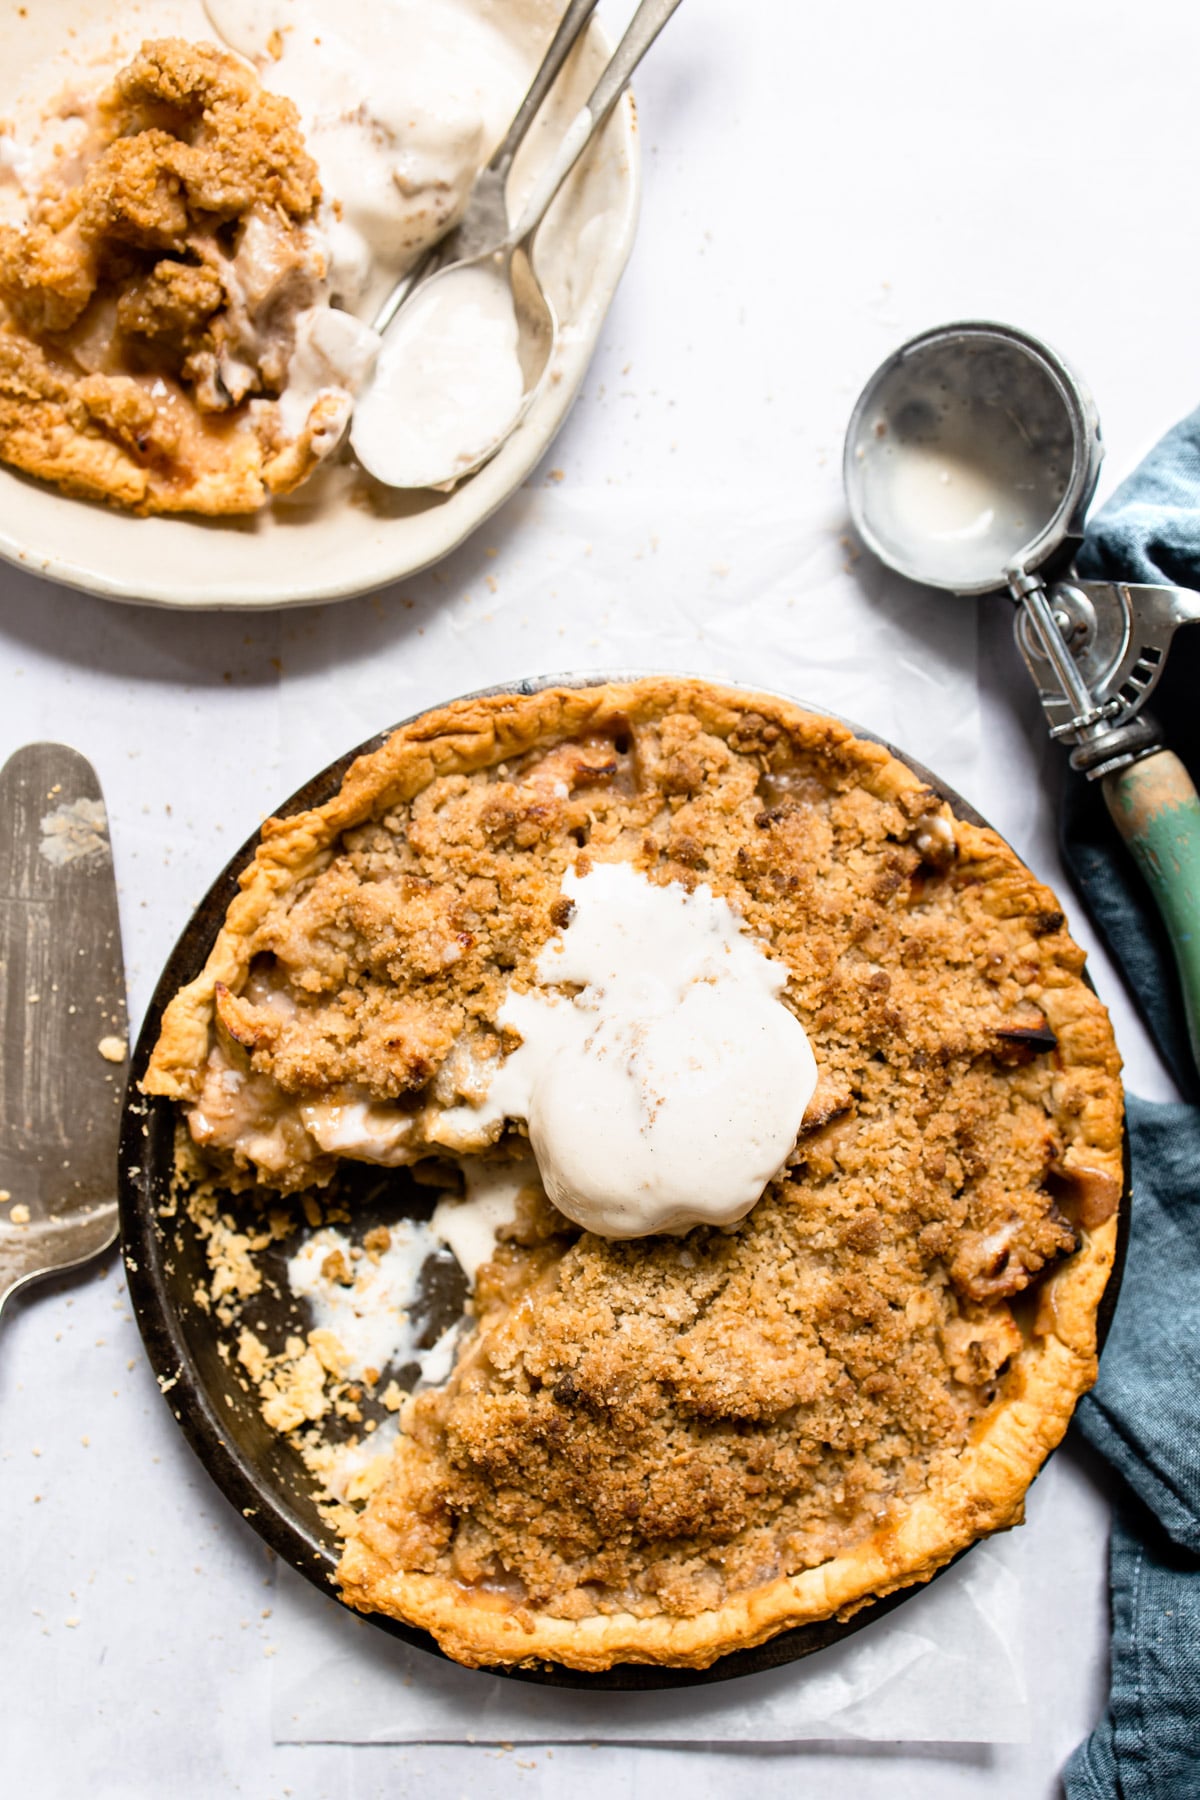 Apple crumb pie topped with a scoop of vanilla ice cream.